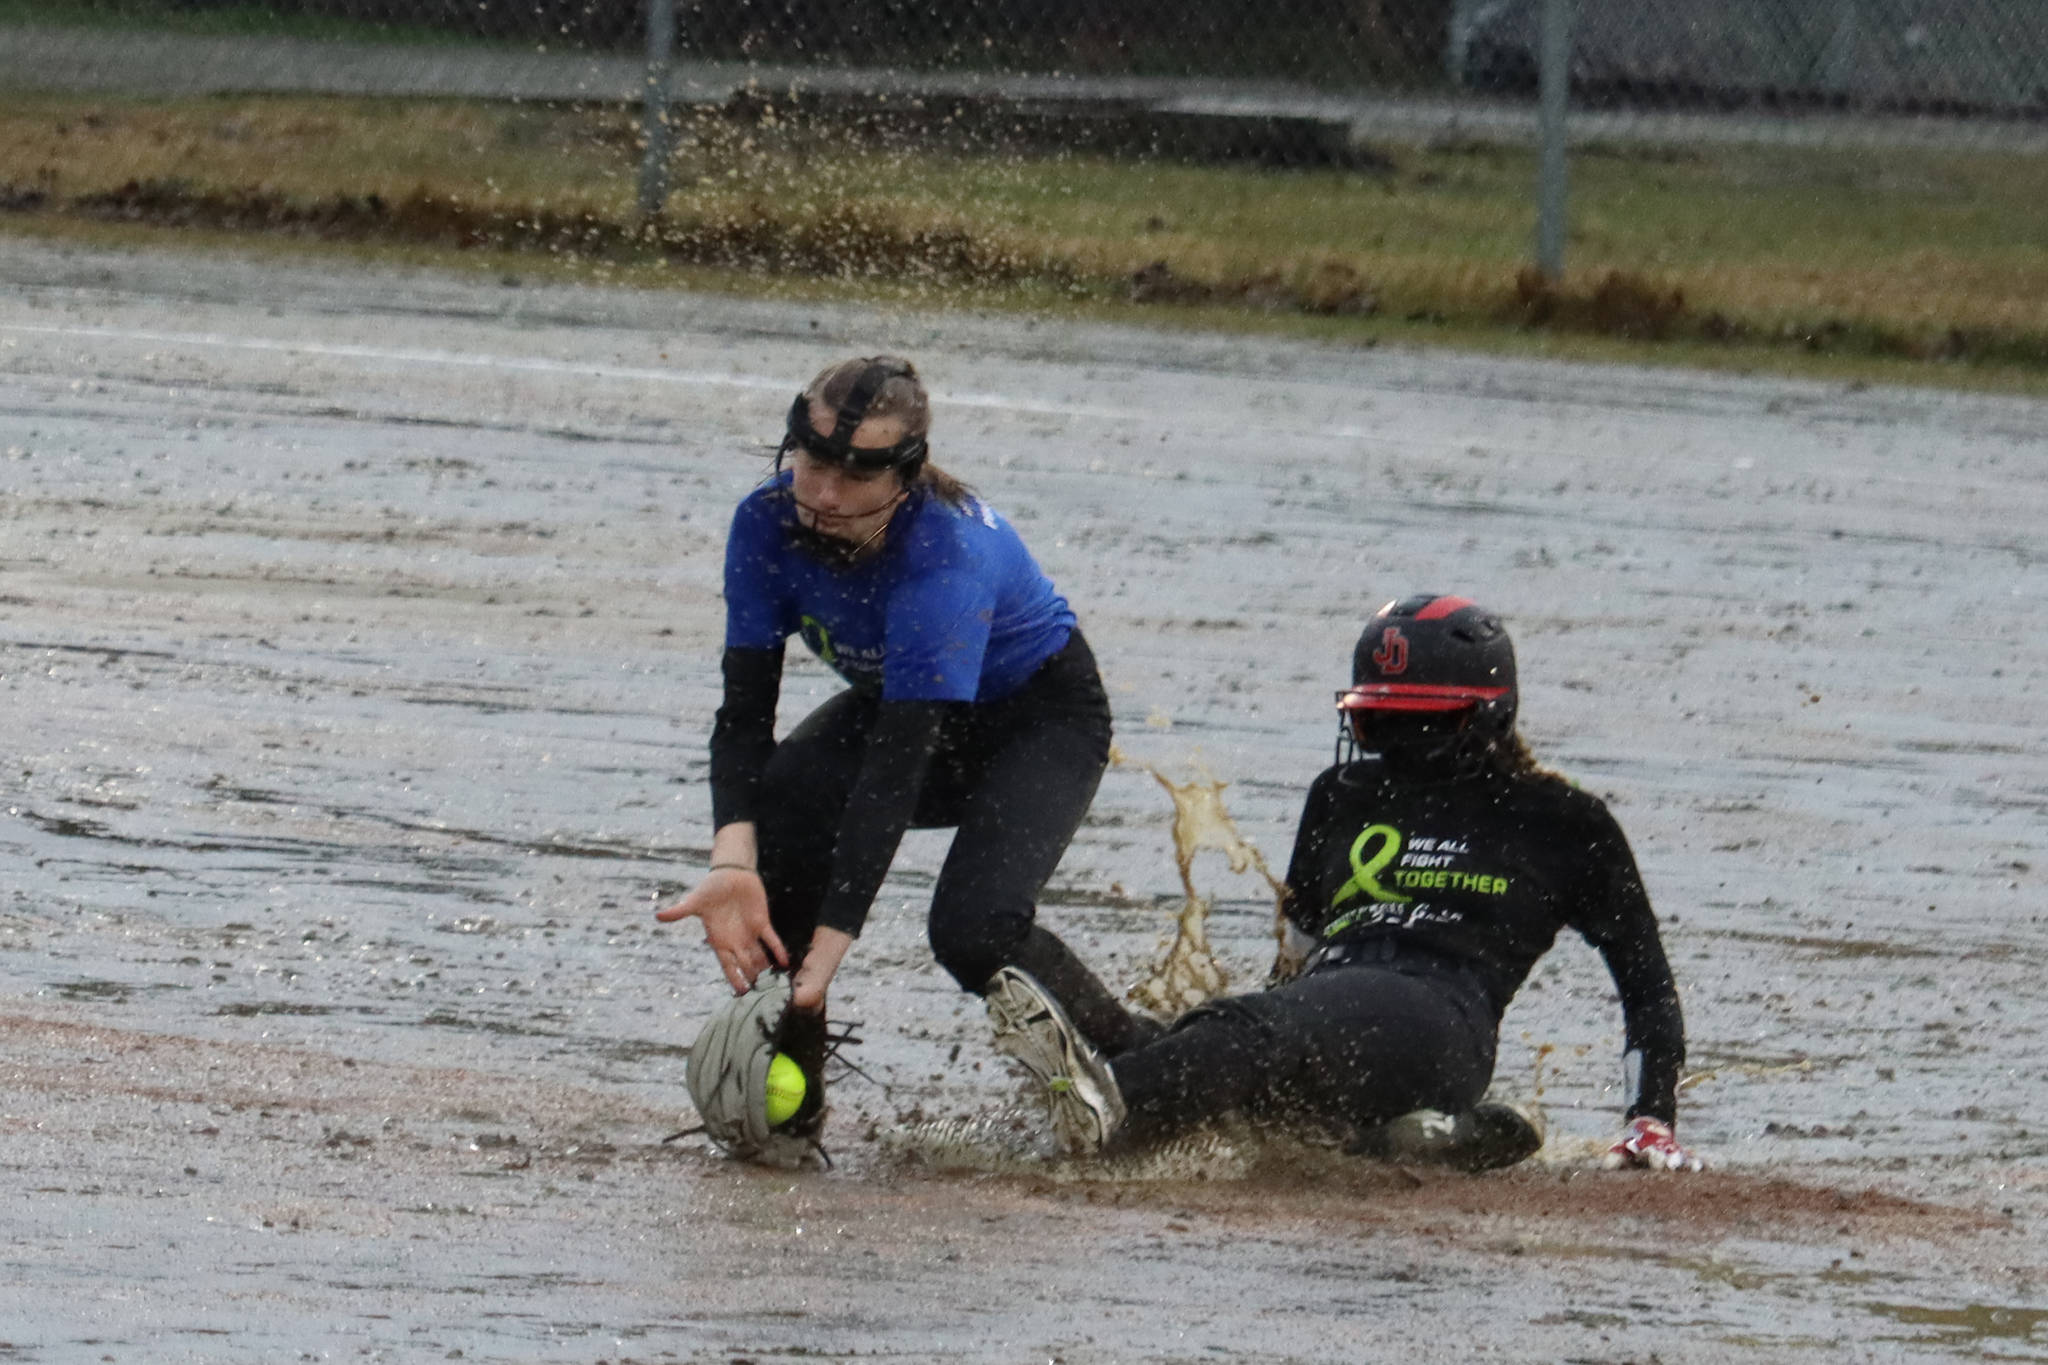 Gloria Bixby, a student-athlete at Juneau Douglas High School: Yadaa.at Kalé, slides safely into second base and avoids the tag from Thunder Mountain's Jenna Dobson during the first inning of a drizzly Friday night game. With about three weeks left in the school year, the Juneau School District announced new COVID-19 protocols that let student-athletes compete without masks. The changes begin this week and were shared with families in an email Monday evening. (Ben Hohenstatt / Juneau Empire)